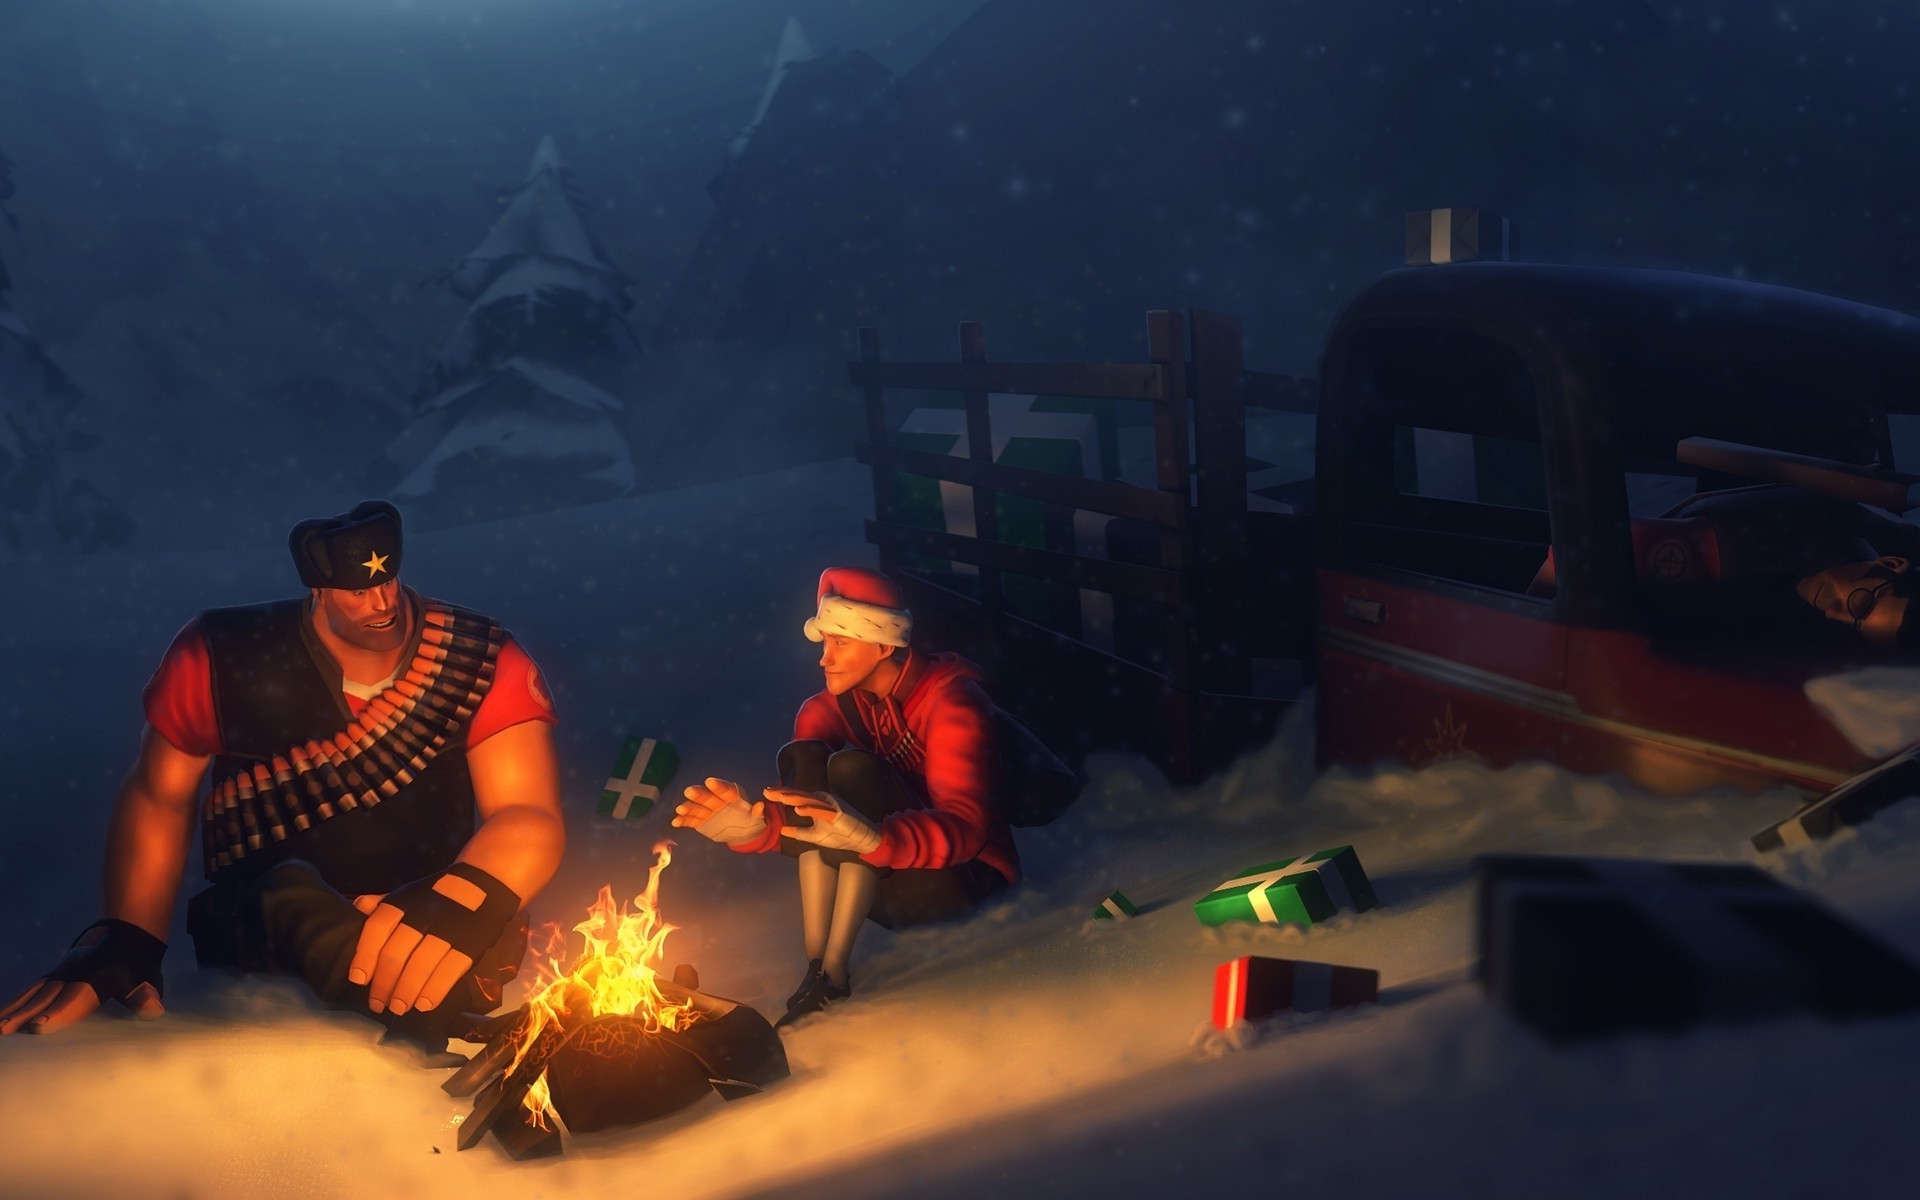 Digital Art, Team Fortress 2, Fire, Camping, Presents, Happy New Year, Truck, Heavy, Snow, Campfire Wallpapers HD / Desktop and Mobile Backgrounds